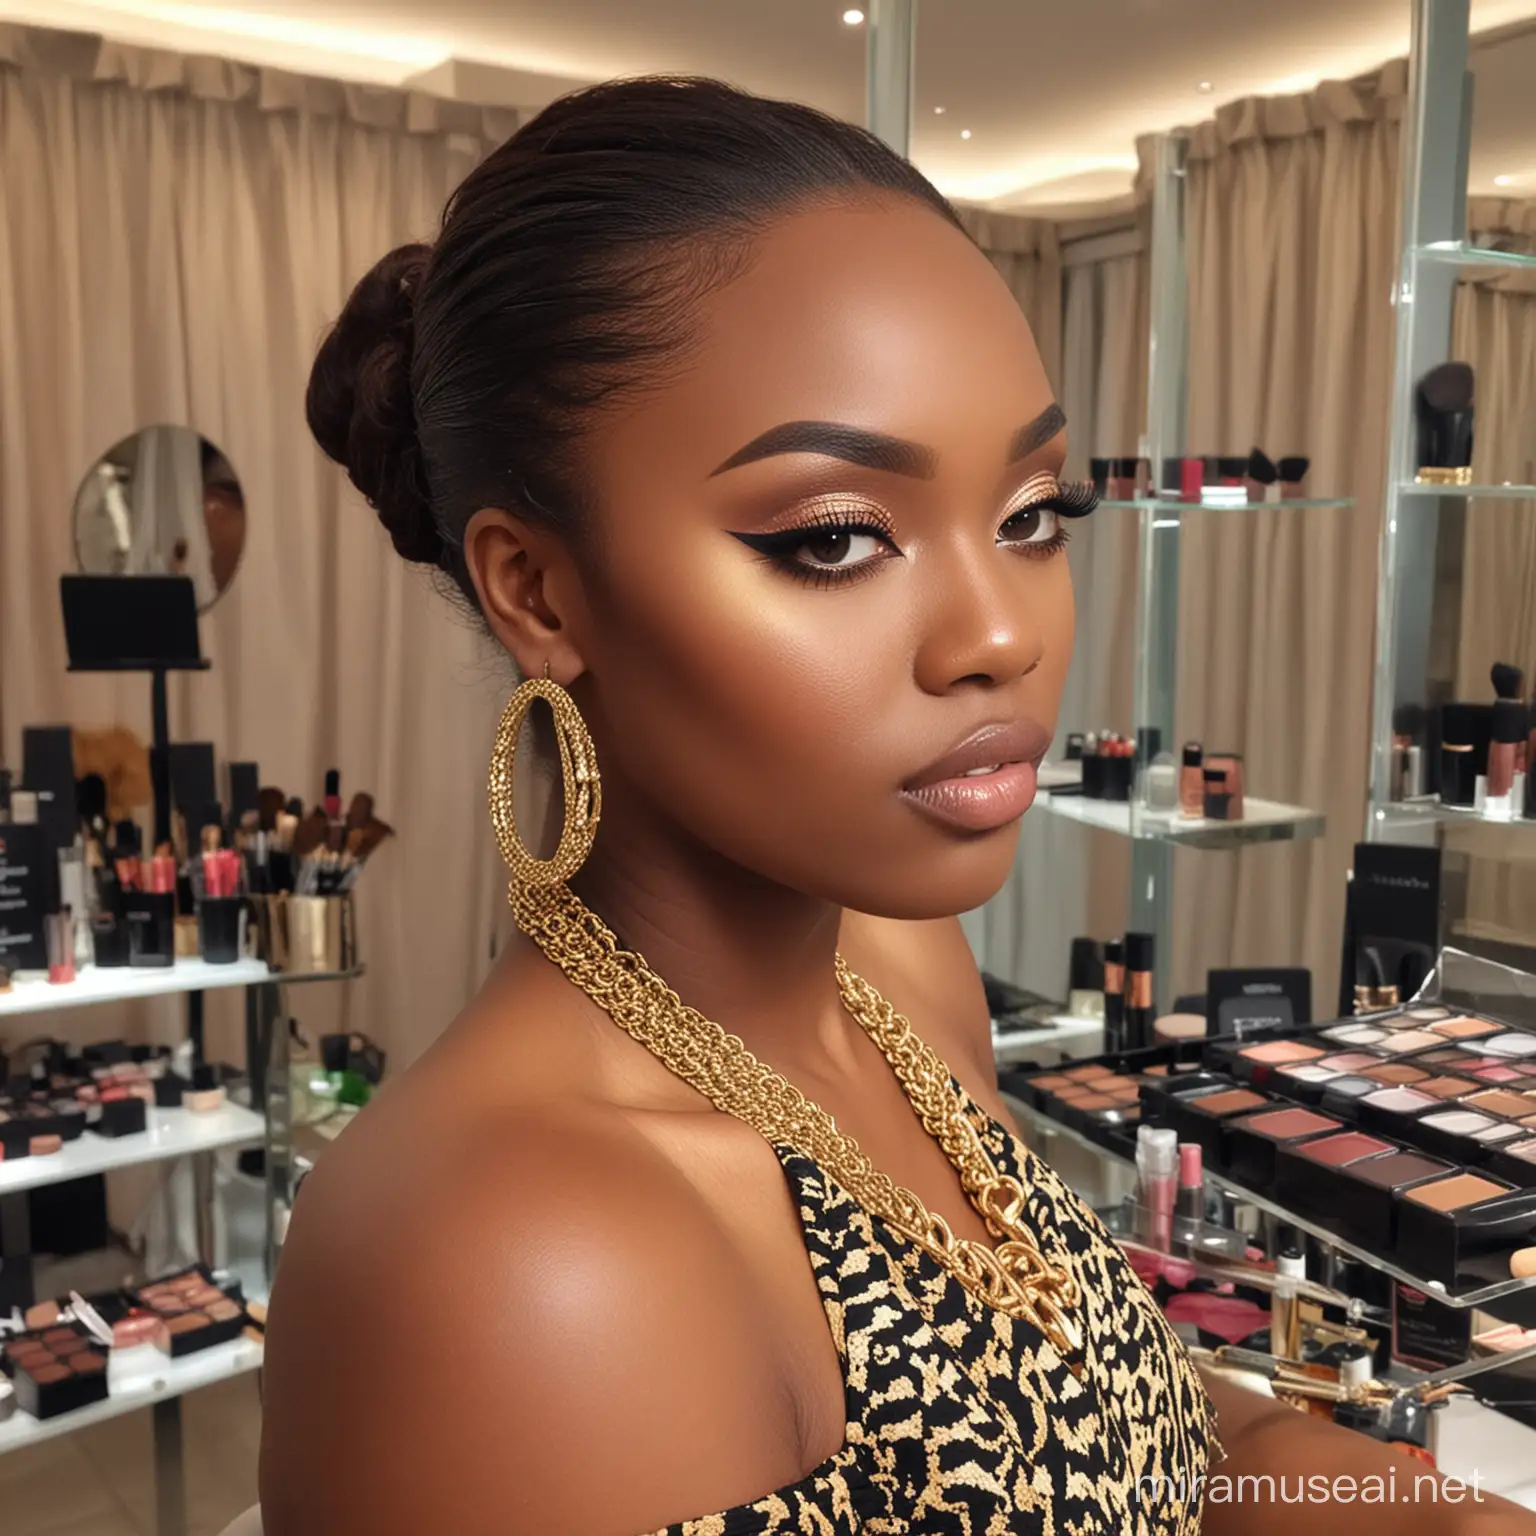 African Makeup Artist Enhancing Beauty with MAG GLAM Display